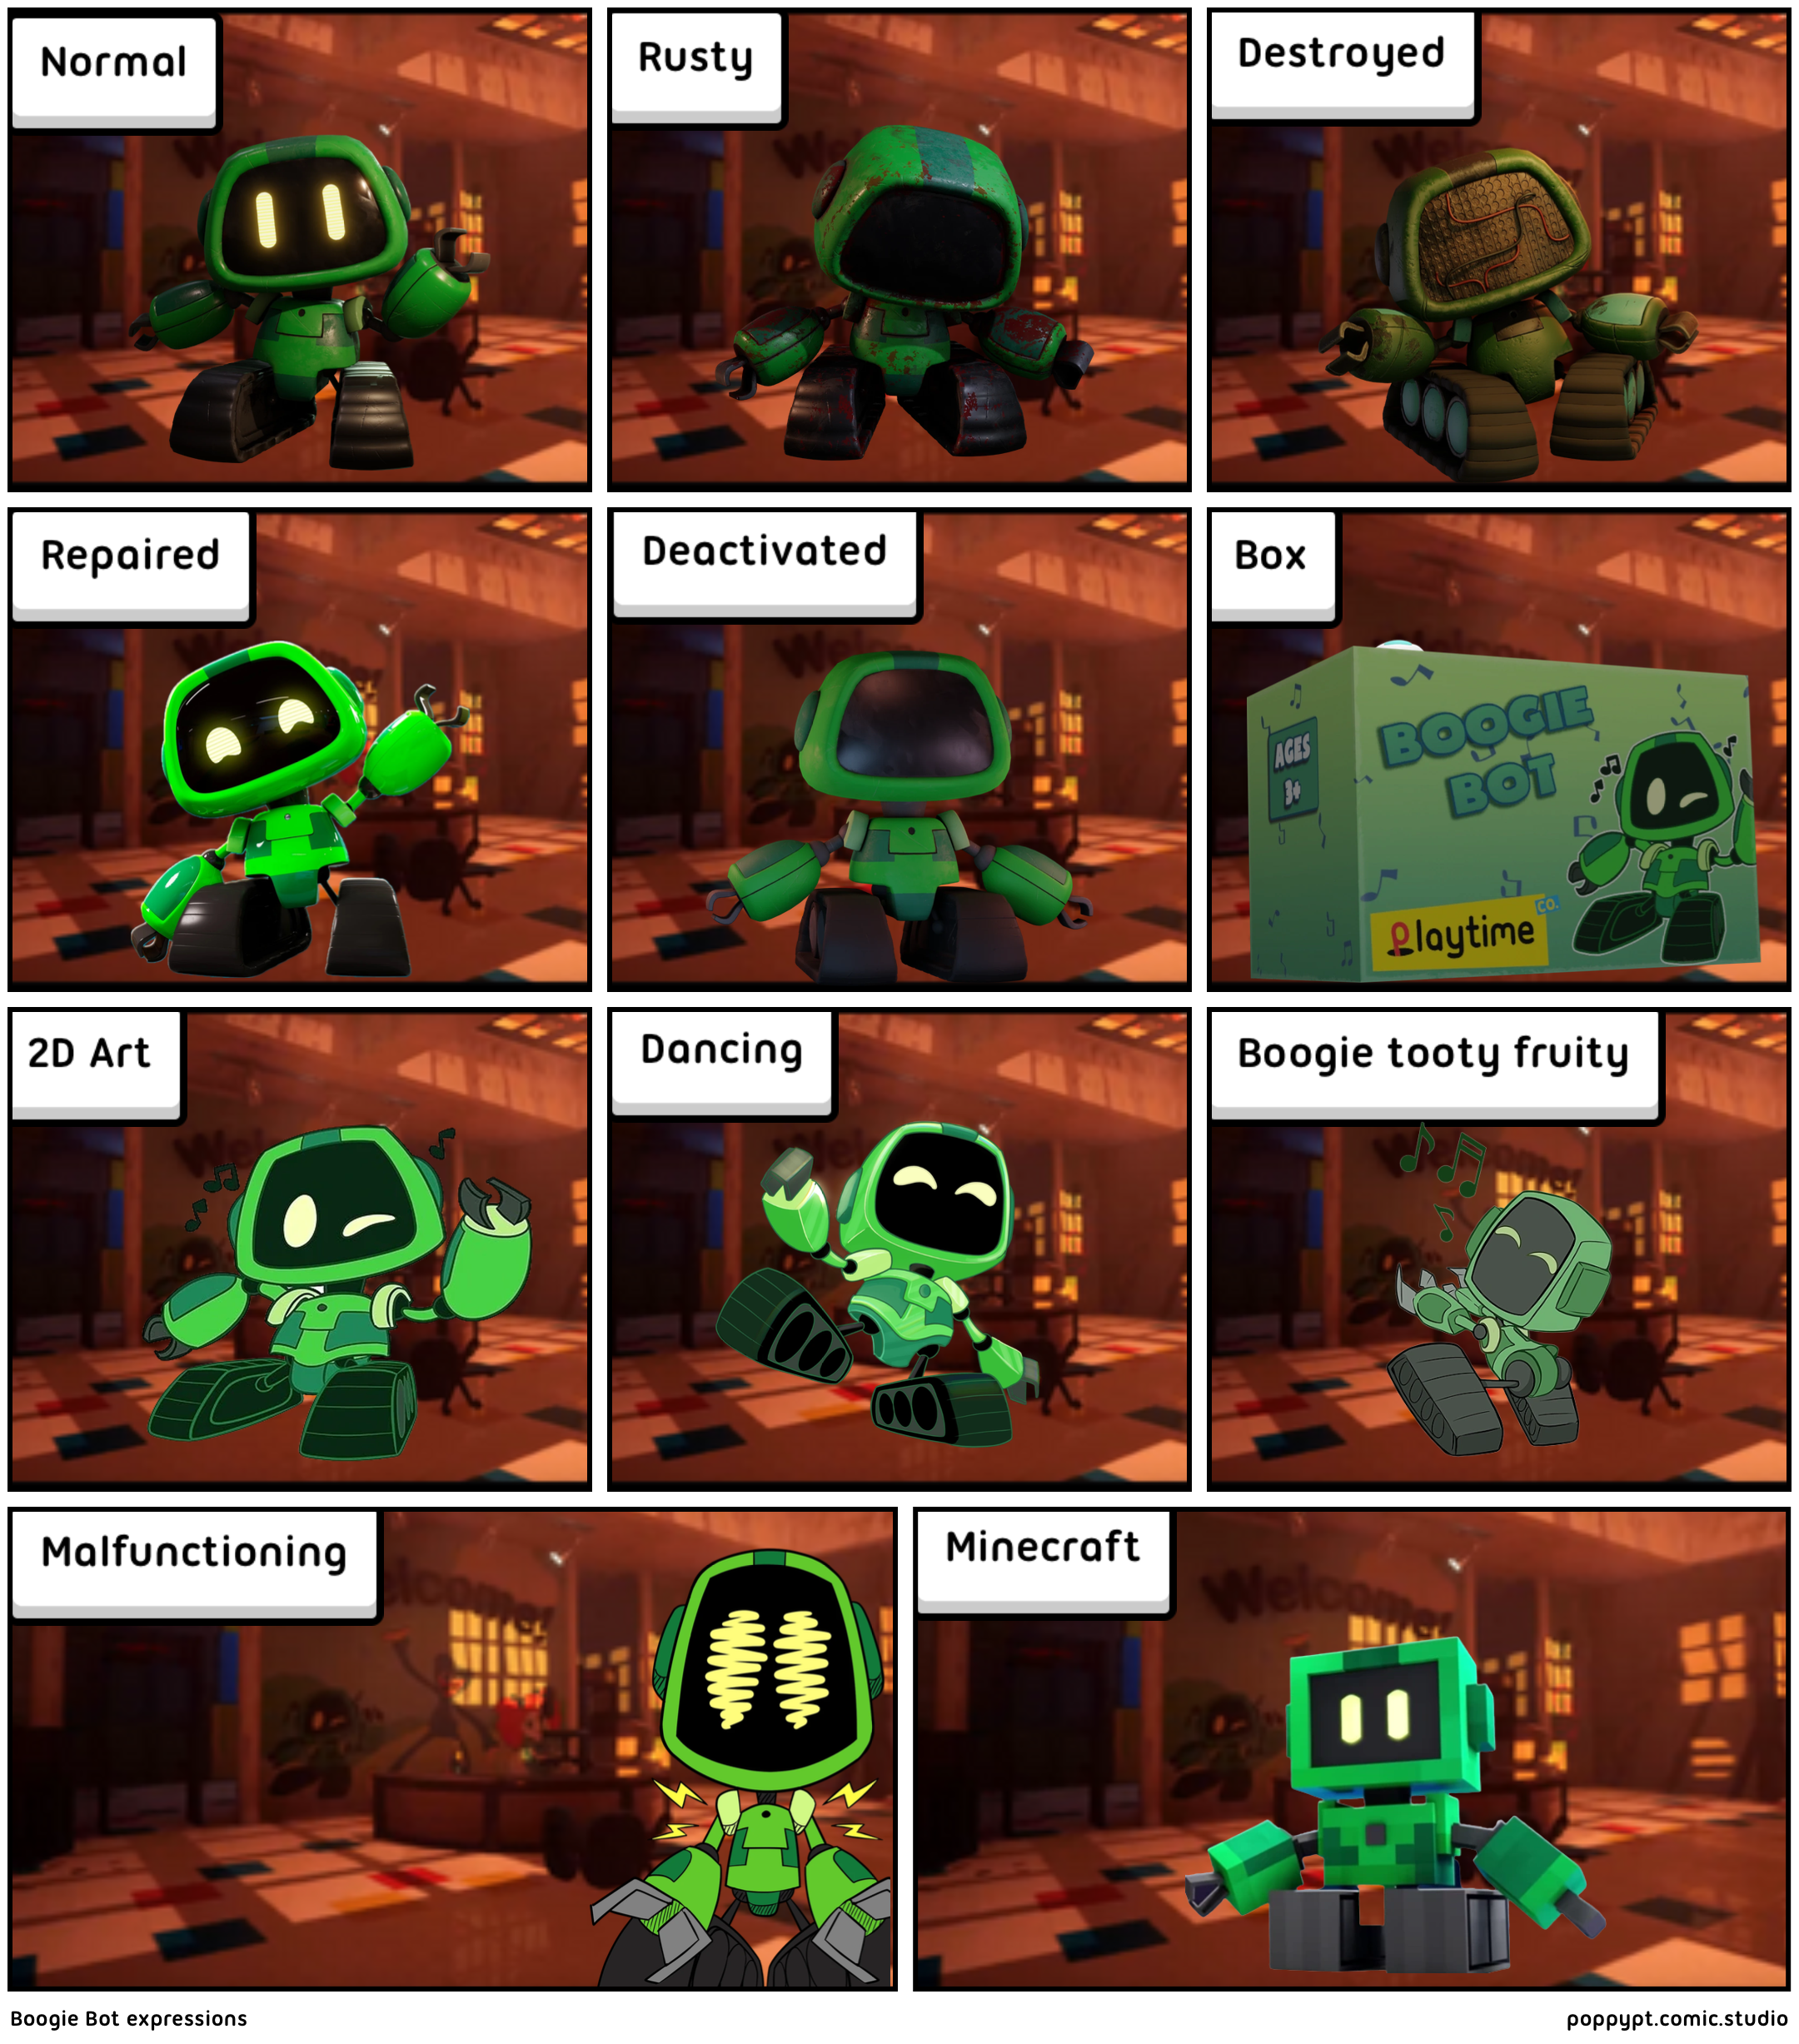 Boogie Bot expressions